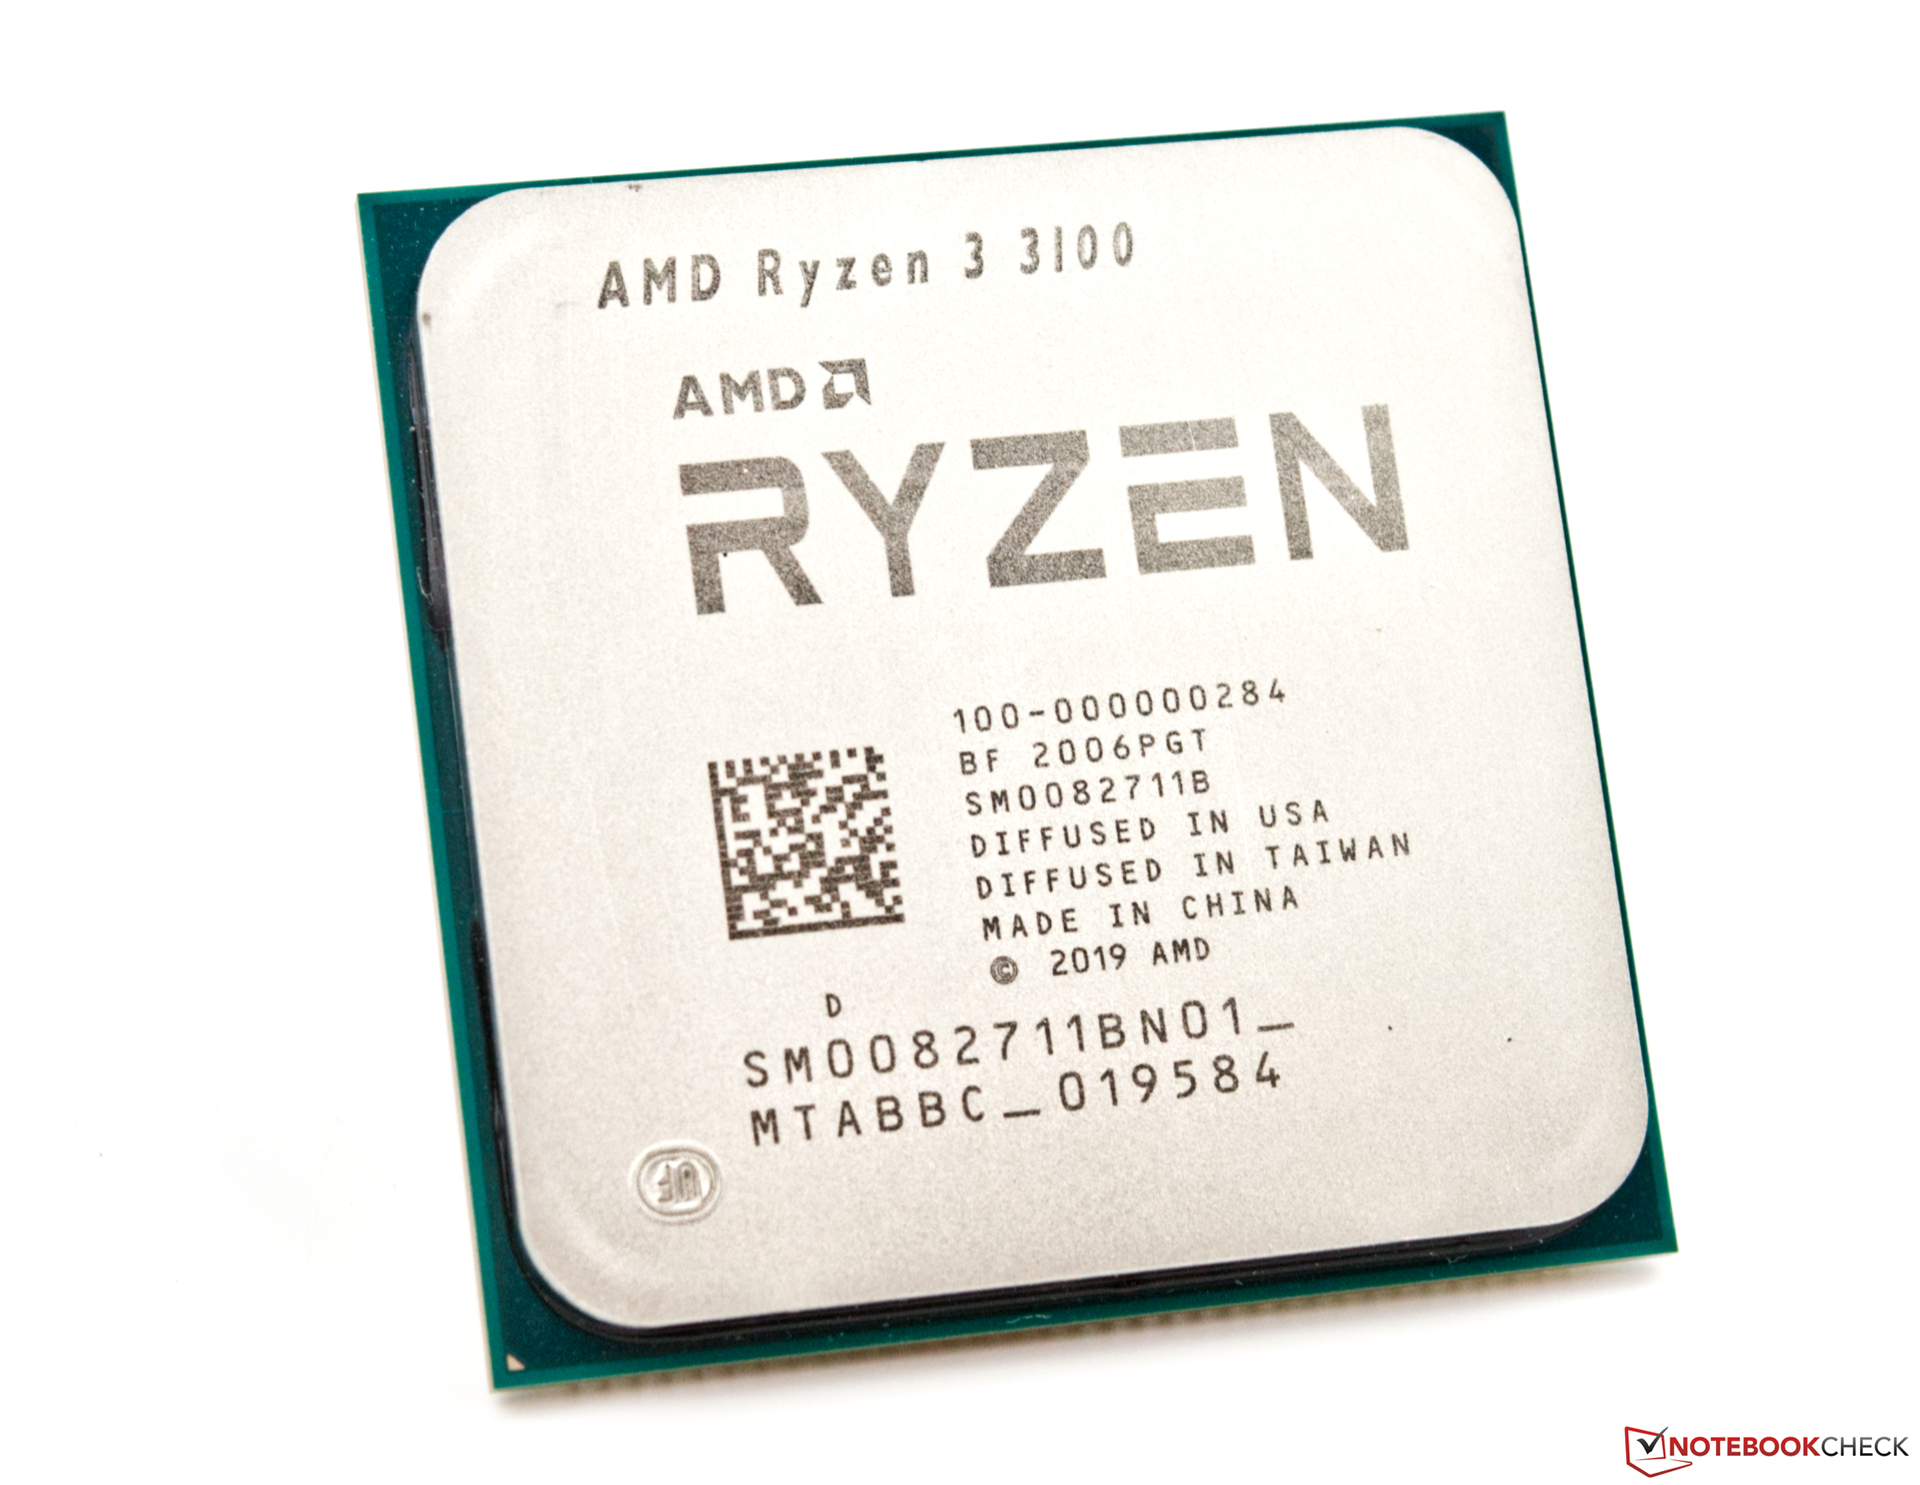 AMD Ryzen 3 3100 Processor - Benchmarks and Specs - NotebookCheck 